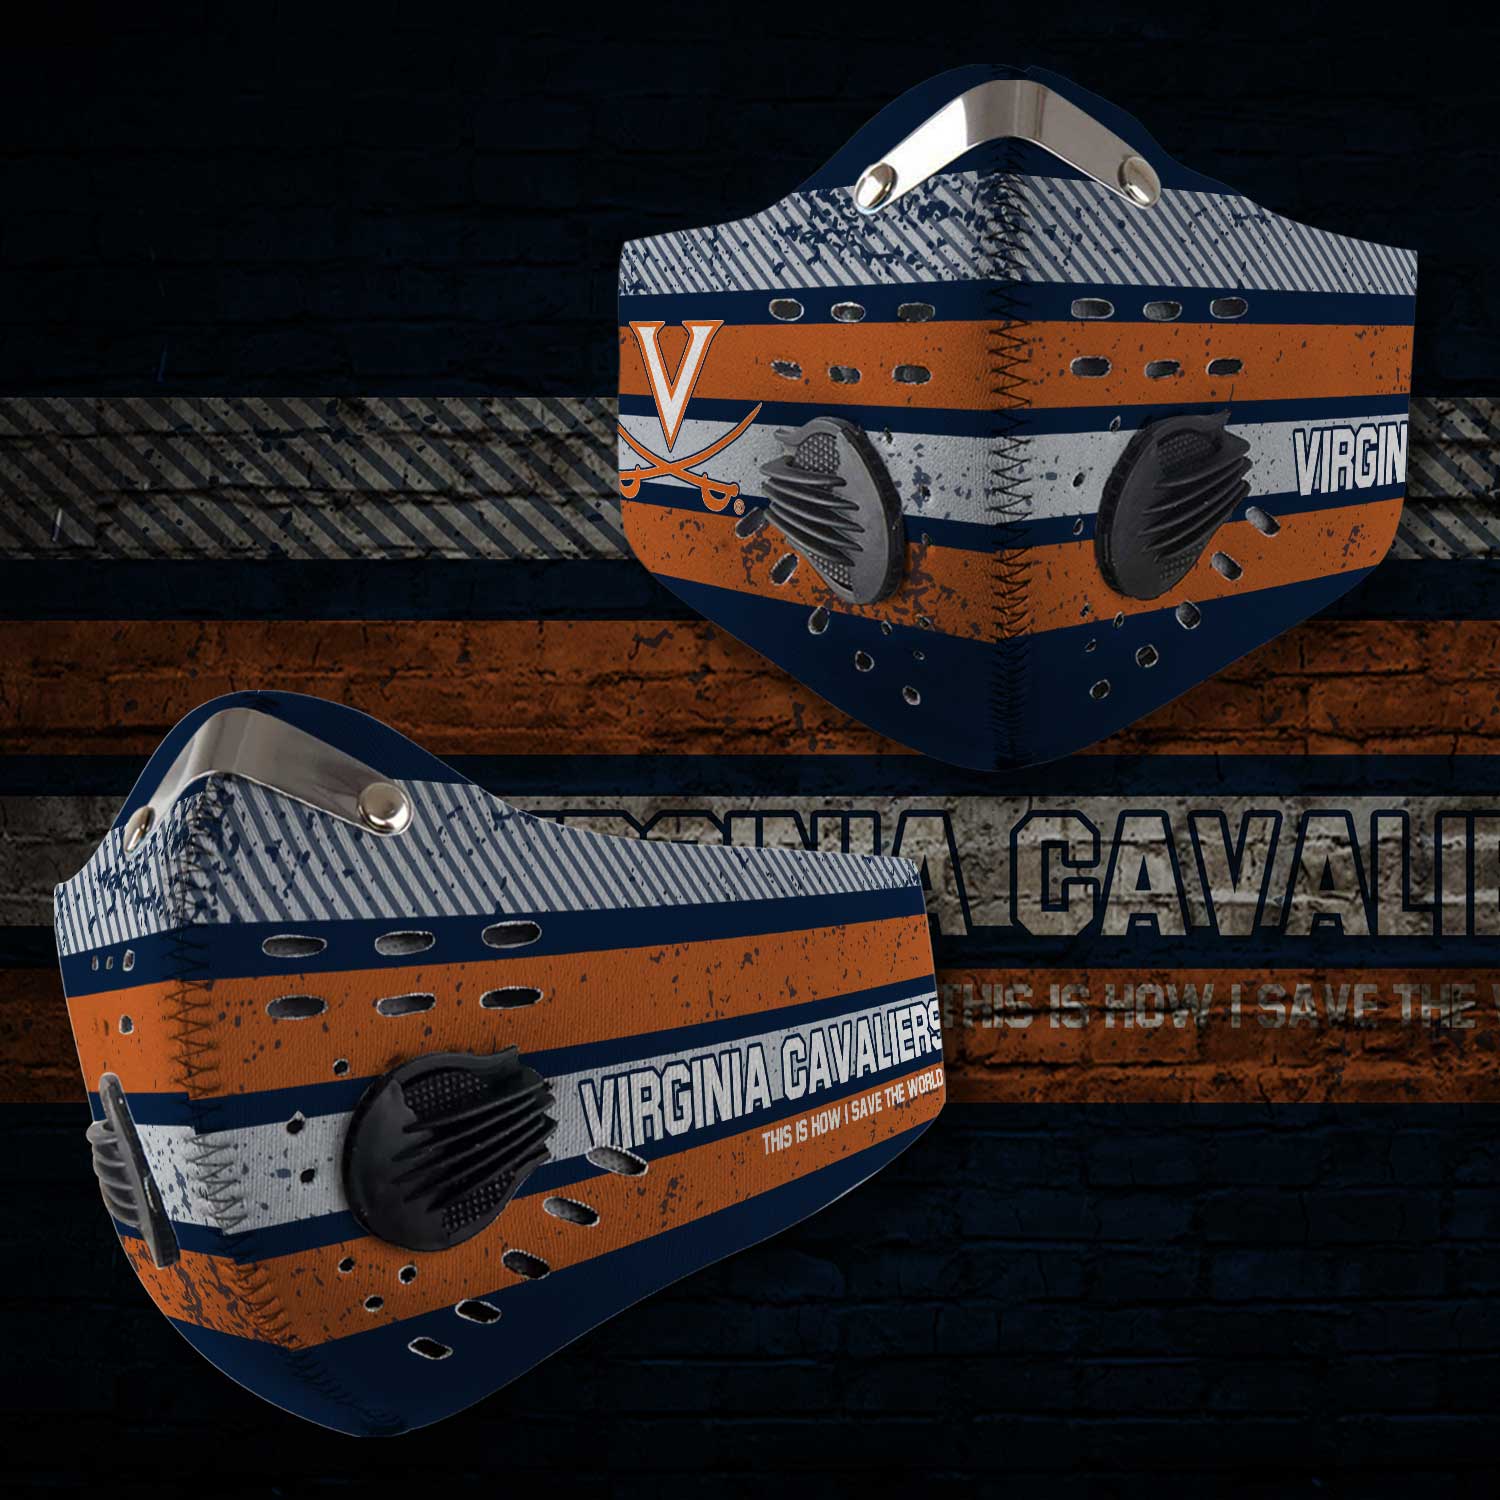 Virginia cavaliers this is how i save the world carbon filter face mask 1